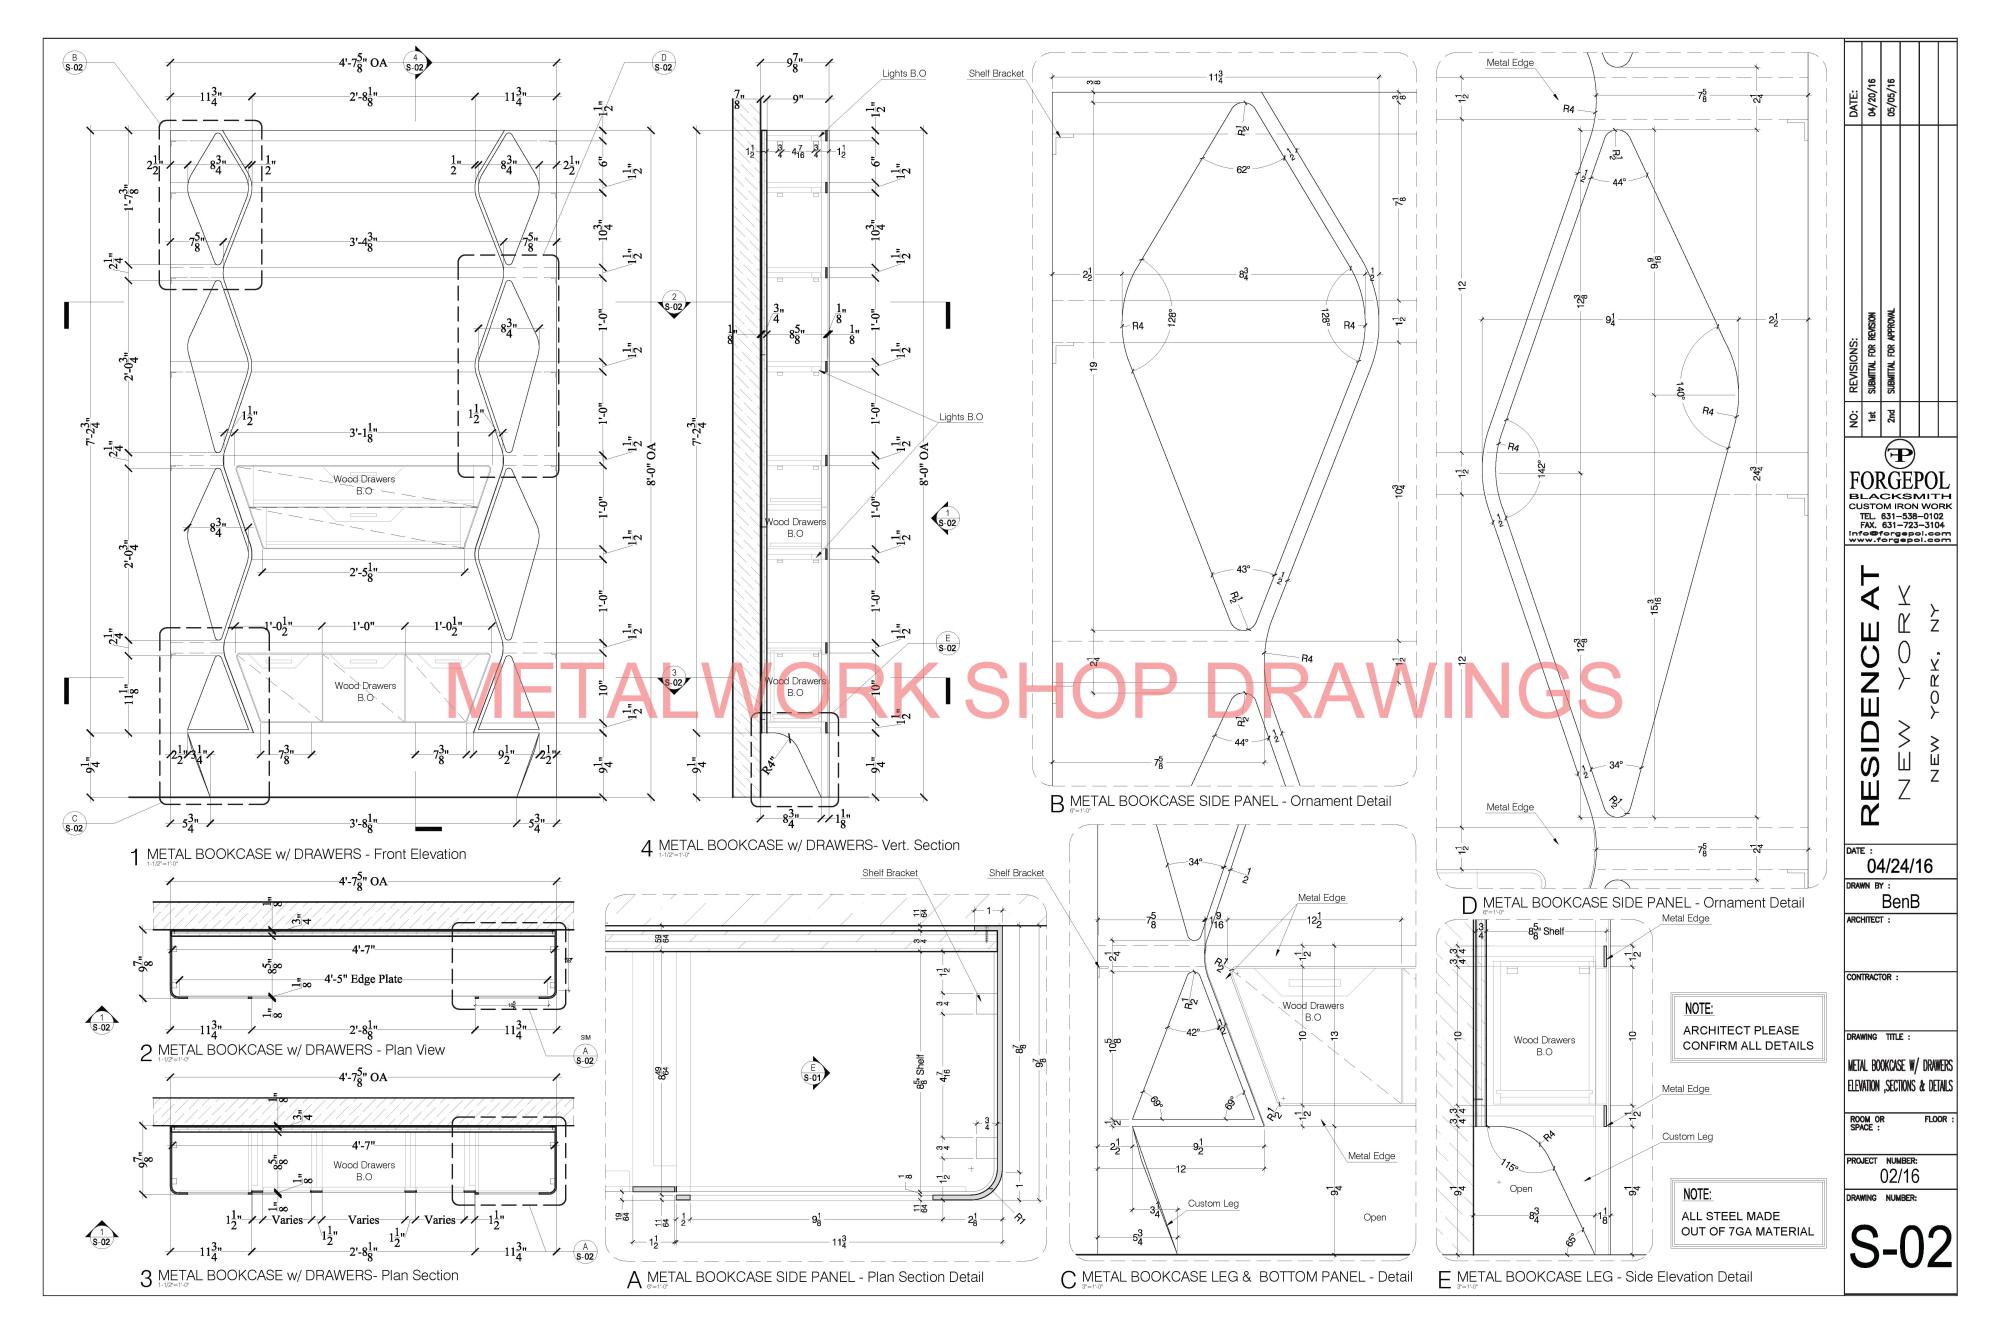 Steel Shop Drawings Services - Structural Steel Shop Drawings Services